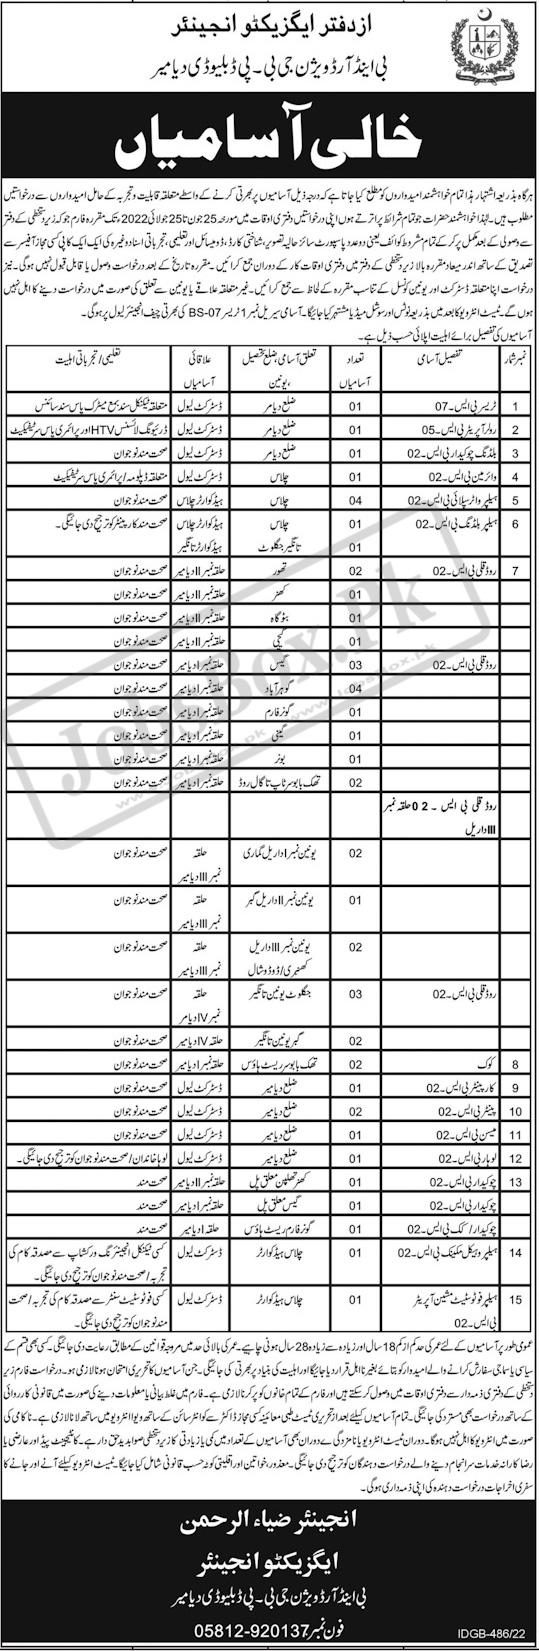 Public Works Department Gilgit Baltistan has announced new employment opportunities for interested individuals who are looking for Government Jobs in Gilgit Baltistan.